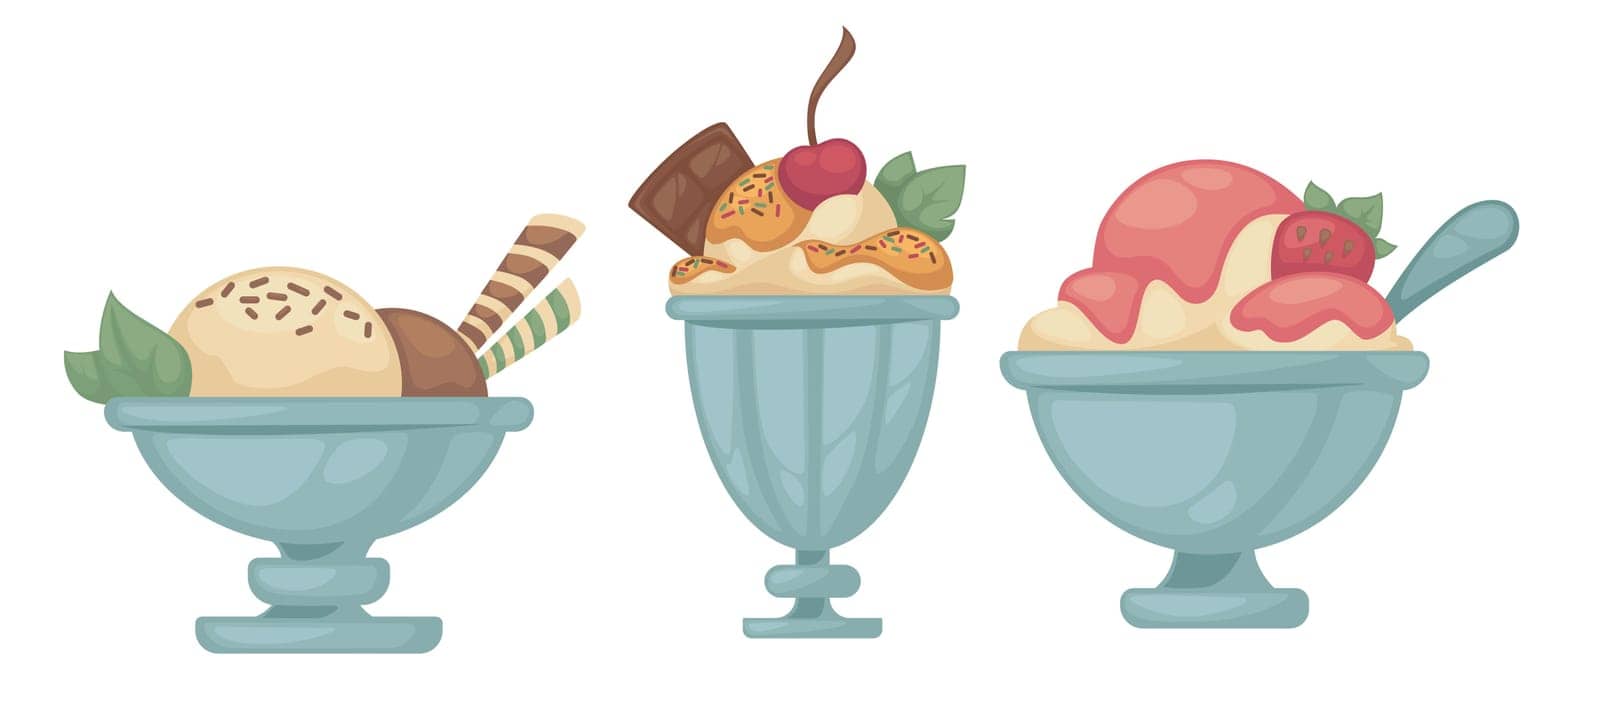 Desserts from shops, stores and restaurants. Isolated ice creams with berries, chocolate and strawberry fruits. Tasty food in cafe served in bowls. Frozen mousse with decor. Vector in flat style